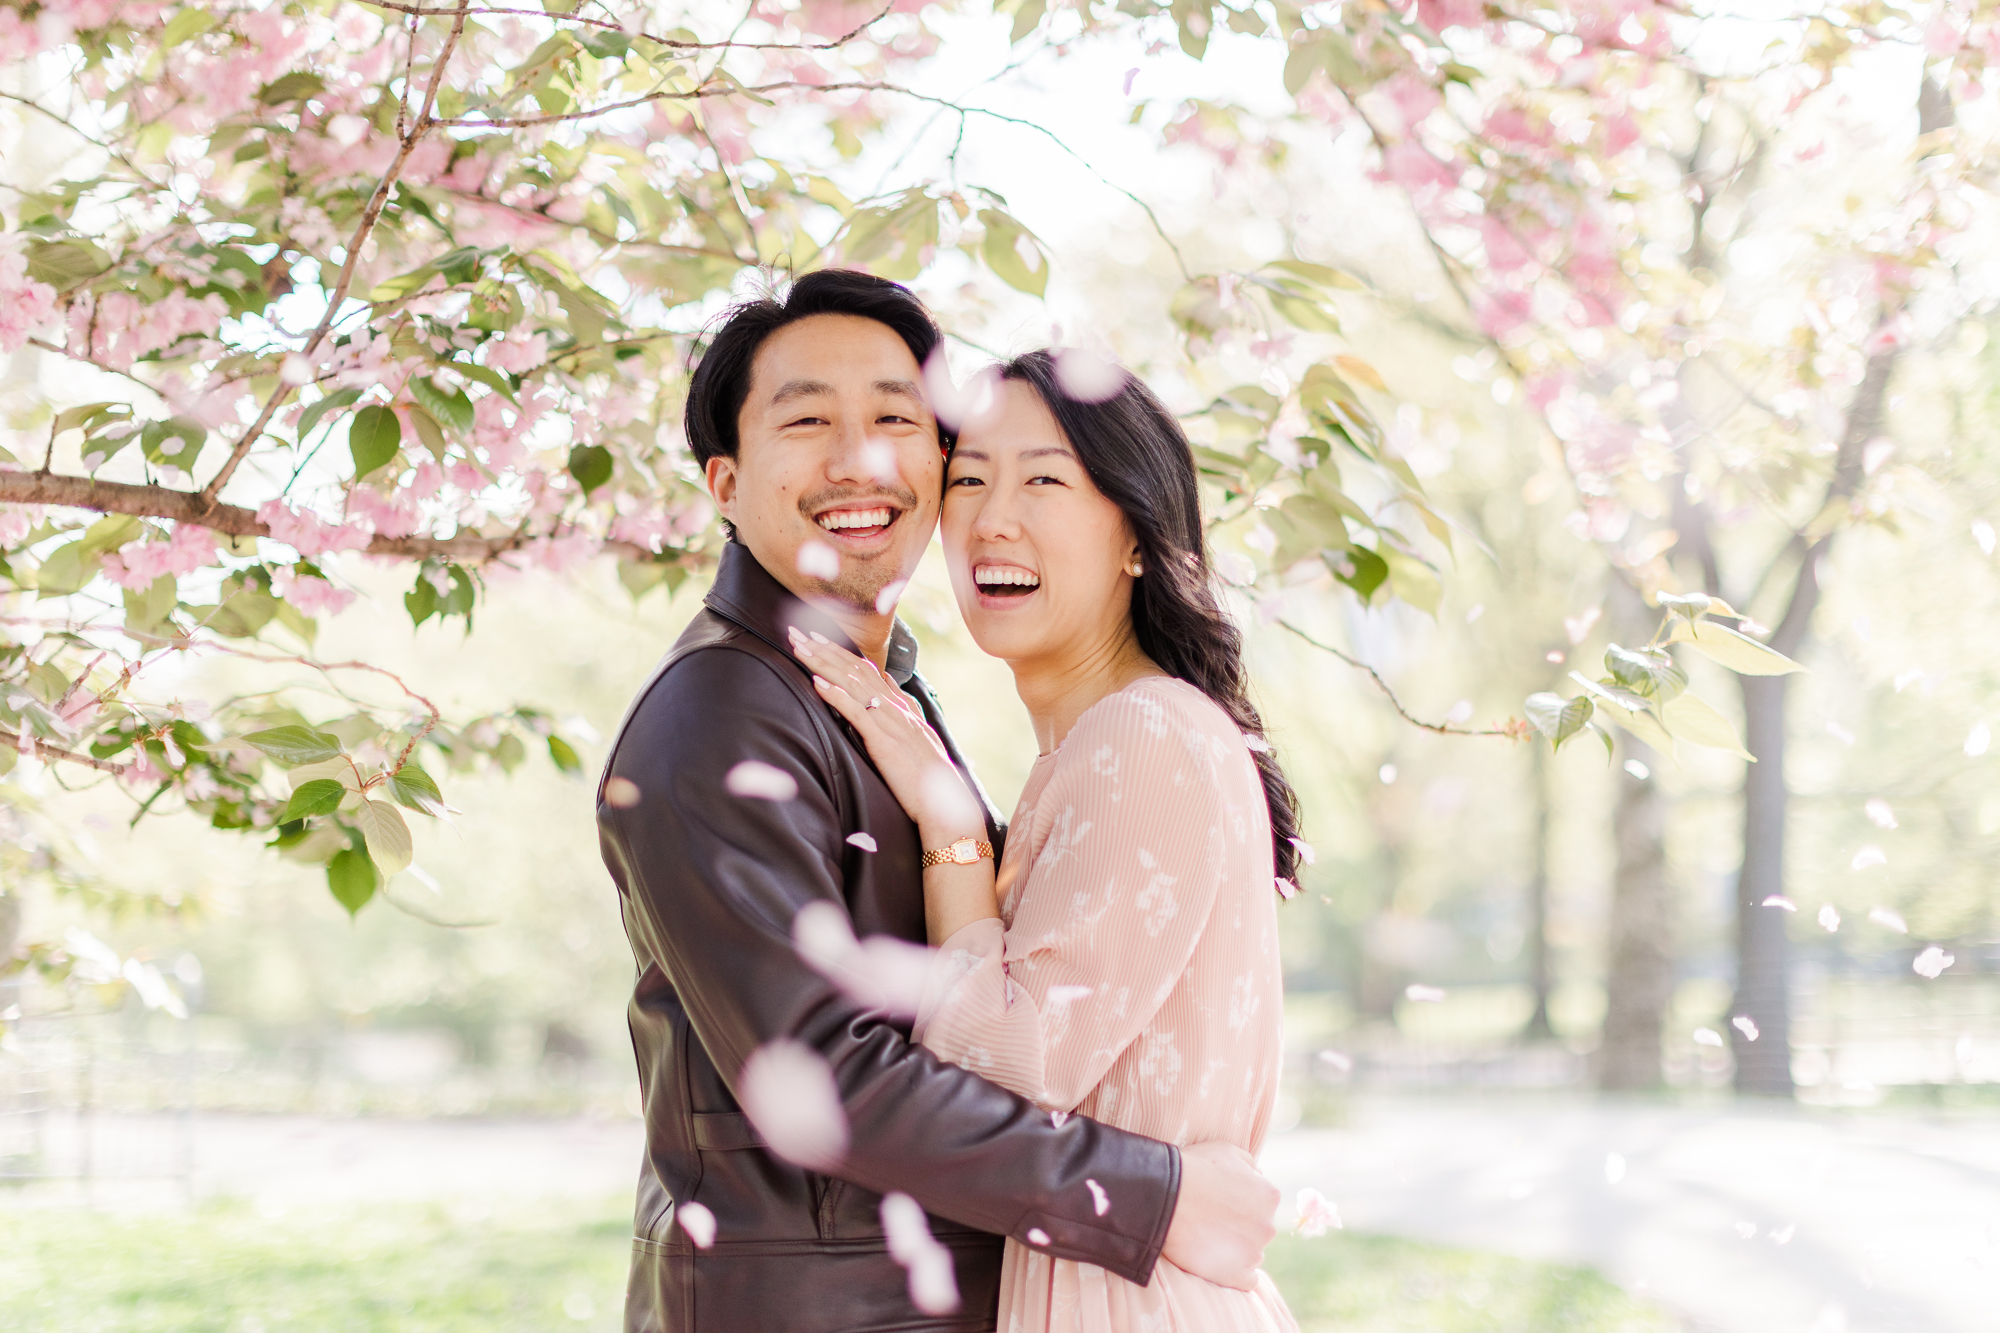 Personal Engagement Photos With Cherry Blossoms in NYC